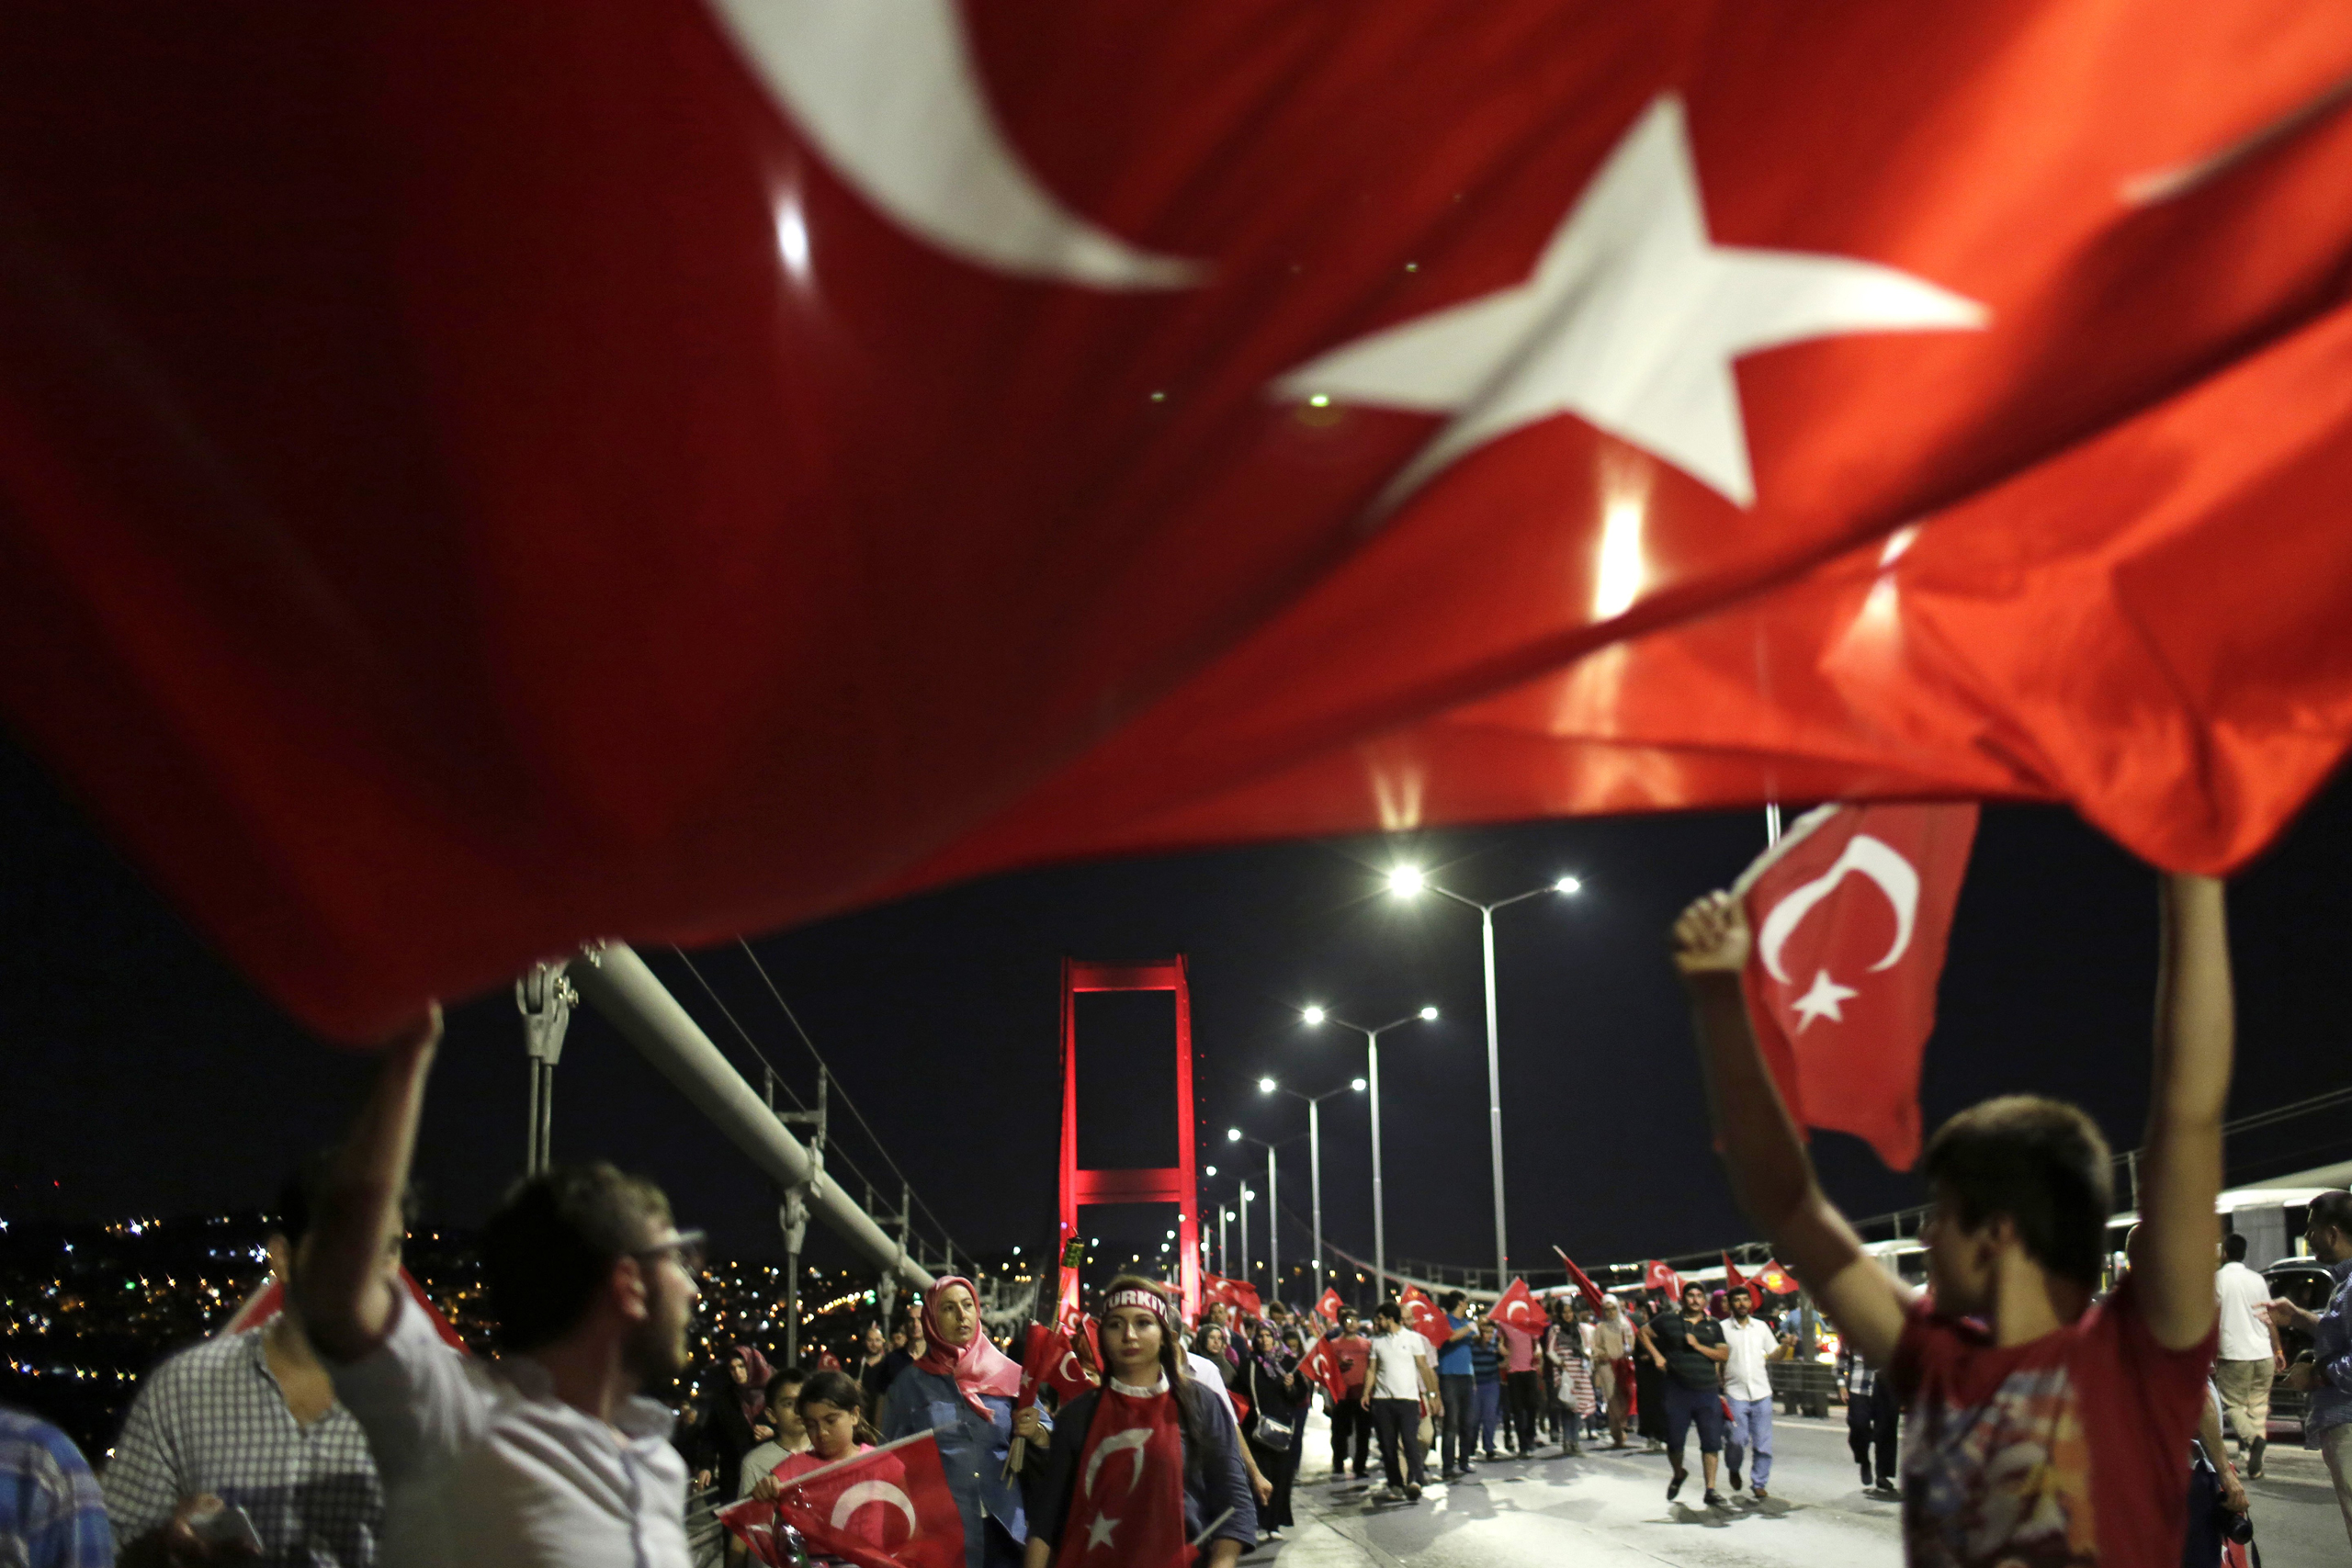 Pro-government supporters wave a Turkish flag as they protest on Istanbul's iconic Bosporus Bridge, late Thursday, July 21, 2016. Turkish lawmakers approved a three-month state of emergency, endorsing new powers for Turkey's President Recep Tayyip Erdogan that would allow him to expand a crackdown that has already included mass arrests and the closure of hundreds of schools, in the wake of the July 15 failed coup. (AP Photo/Petros Giannakouris) (Petros Giannakouris—AP)